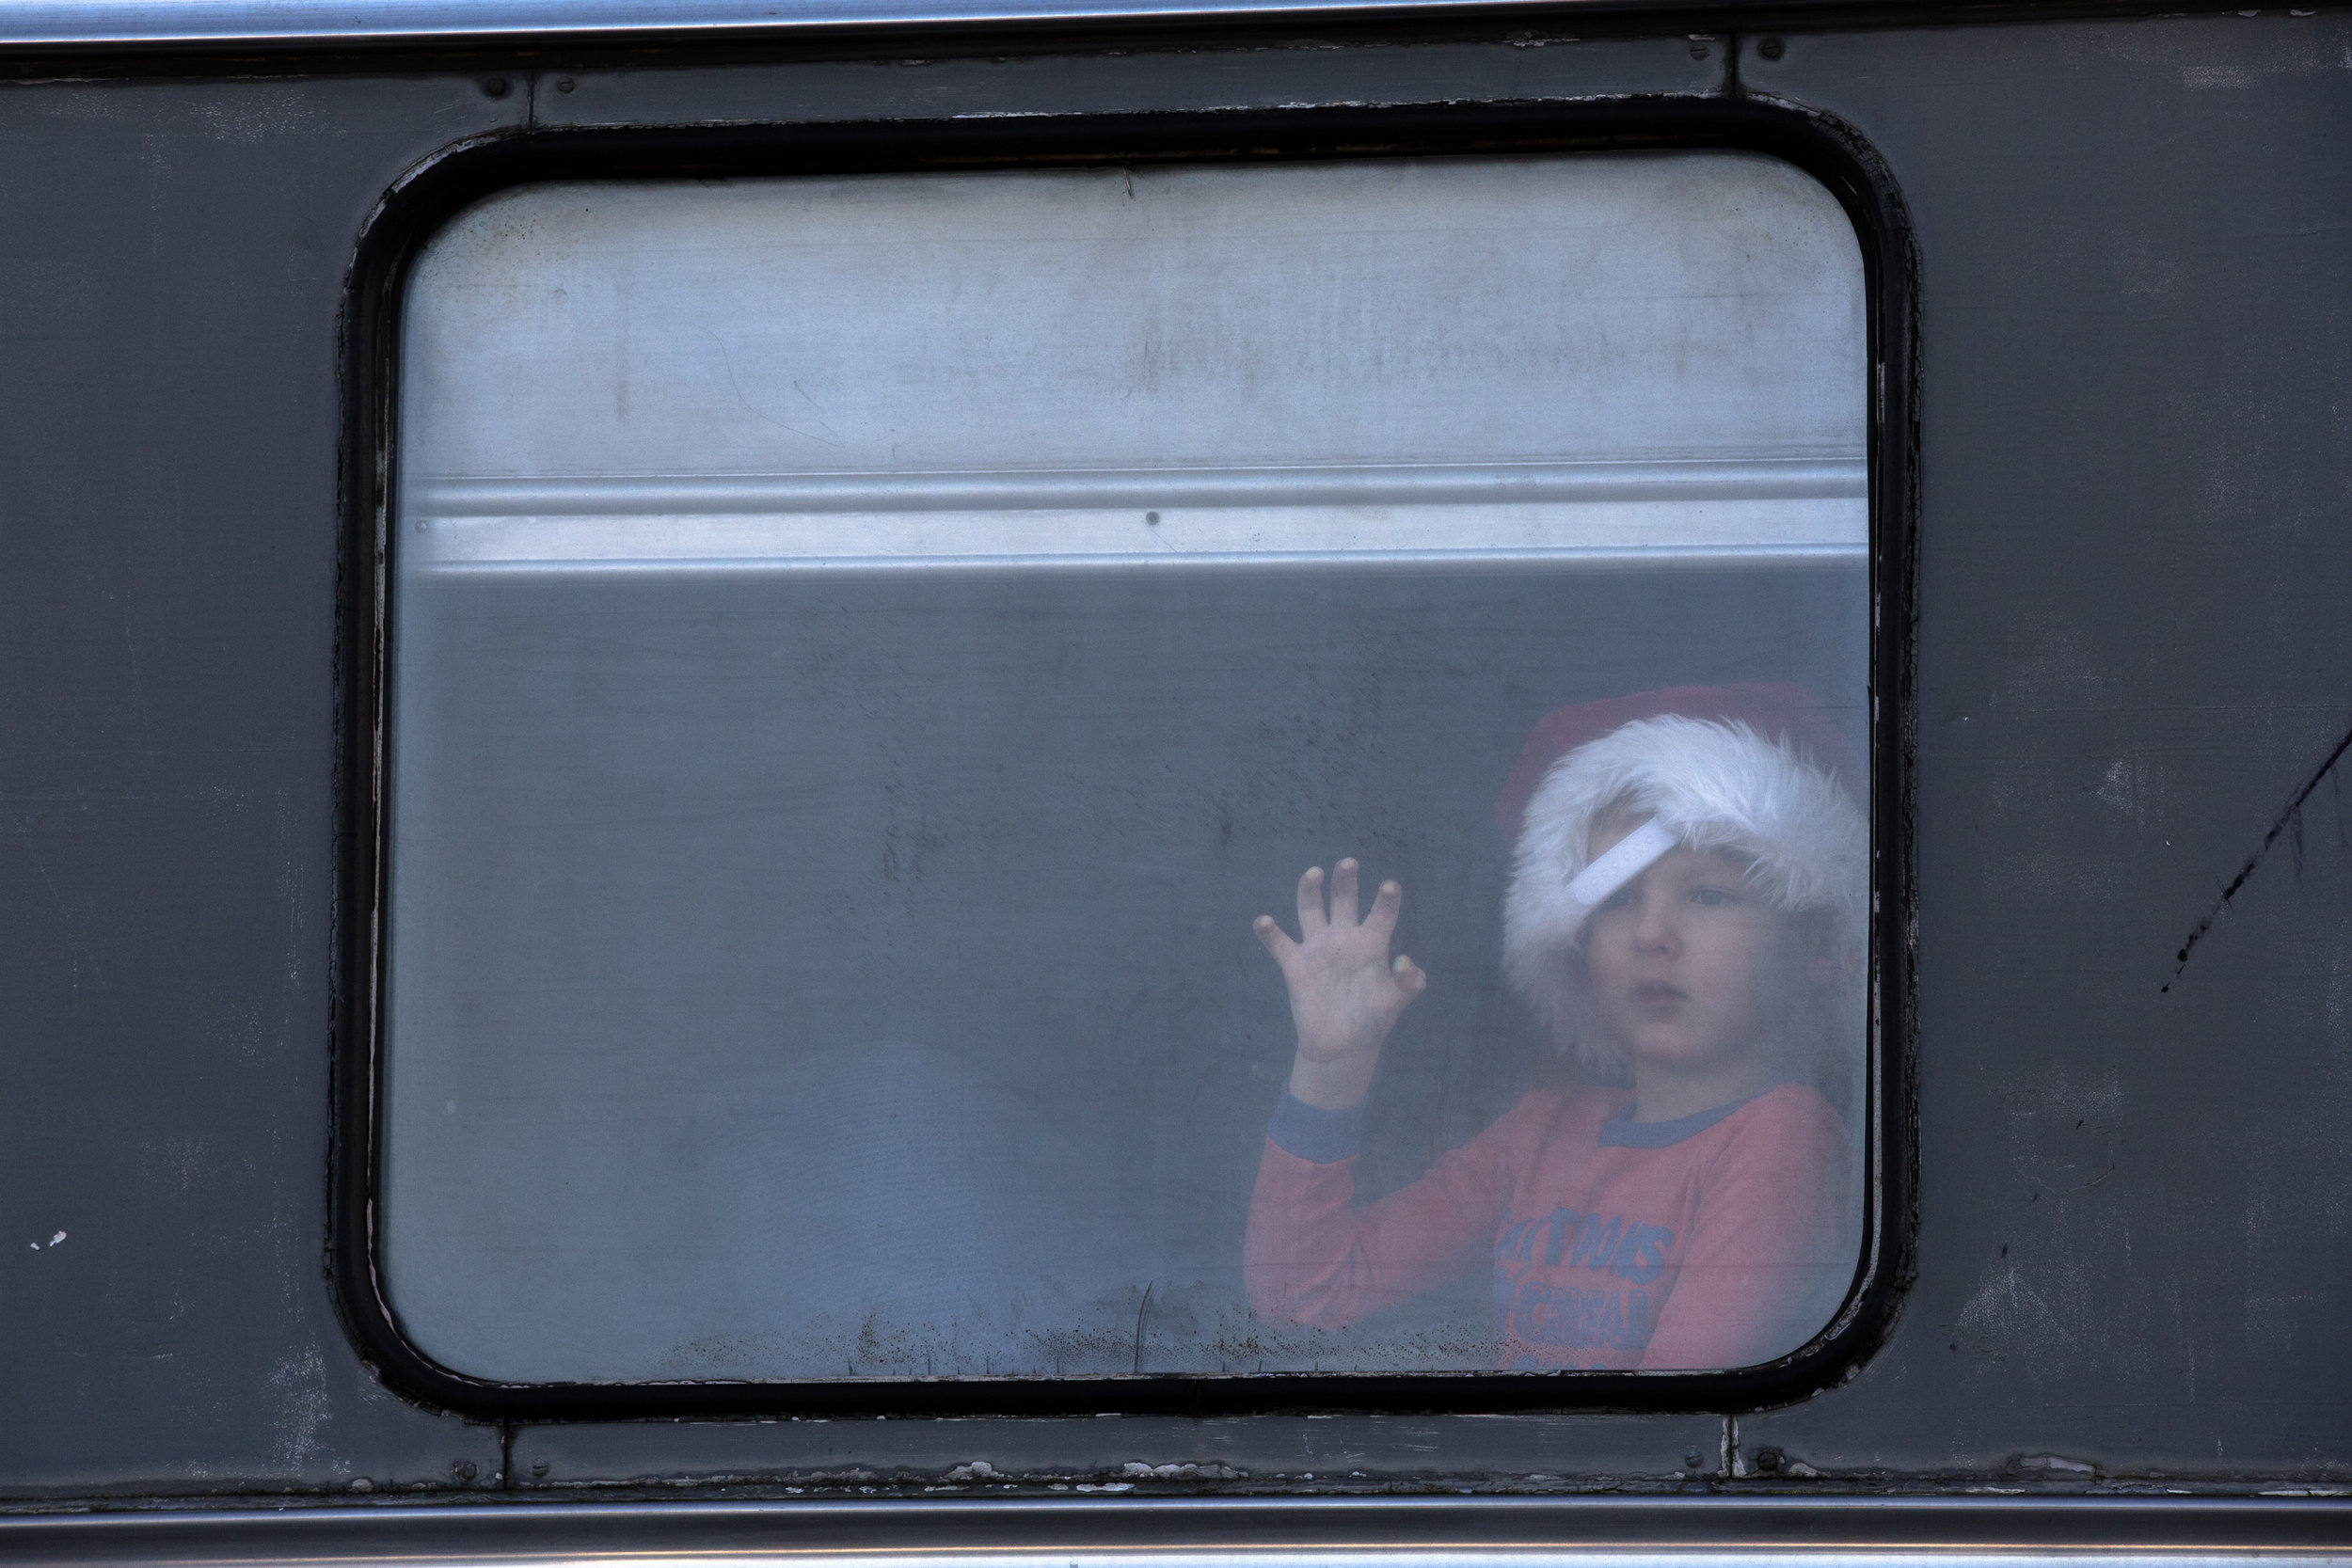  A child looks out the window of a train at the Medina Railroad Museum during the Polar Express Event on Dec. 2, 2018 in Medina, N.Y. 